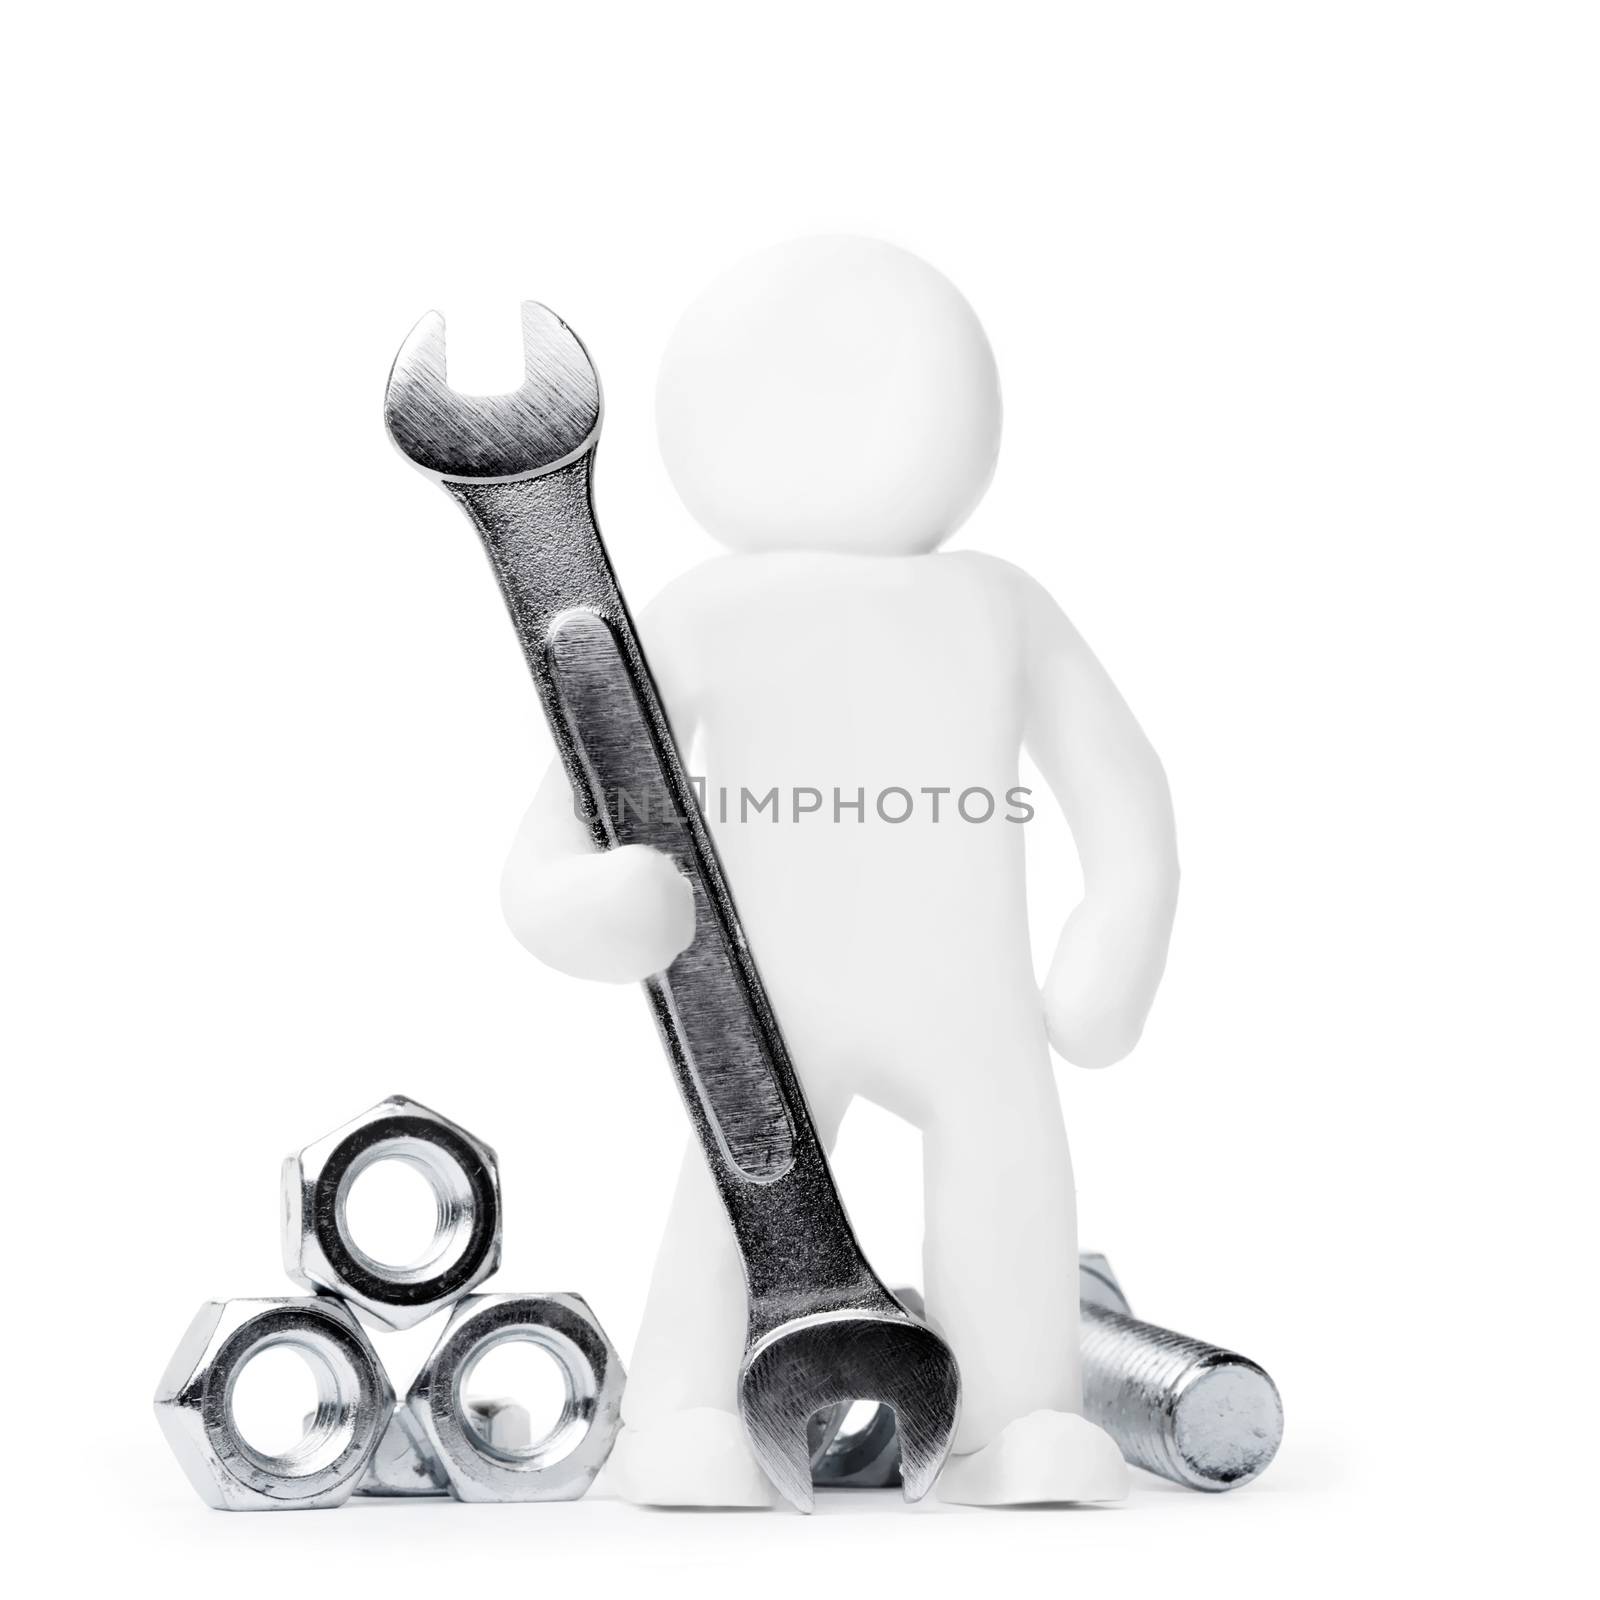 Plasticine man with spanner, screws and nuts isolated on white background